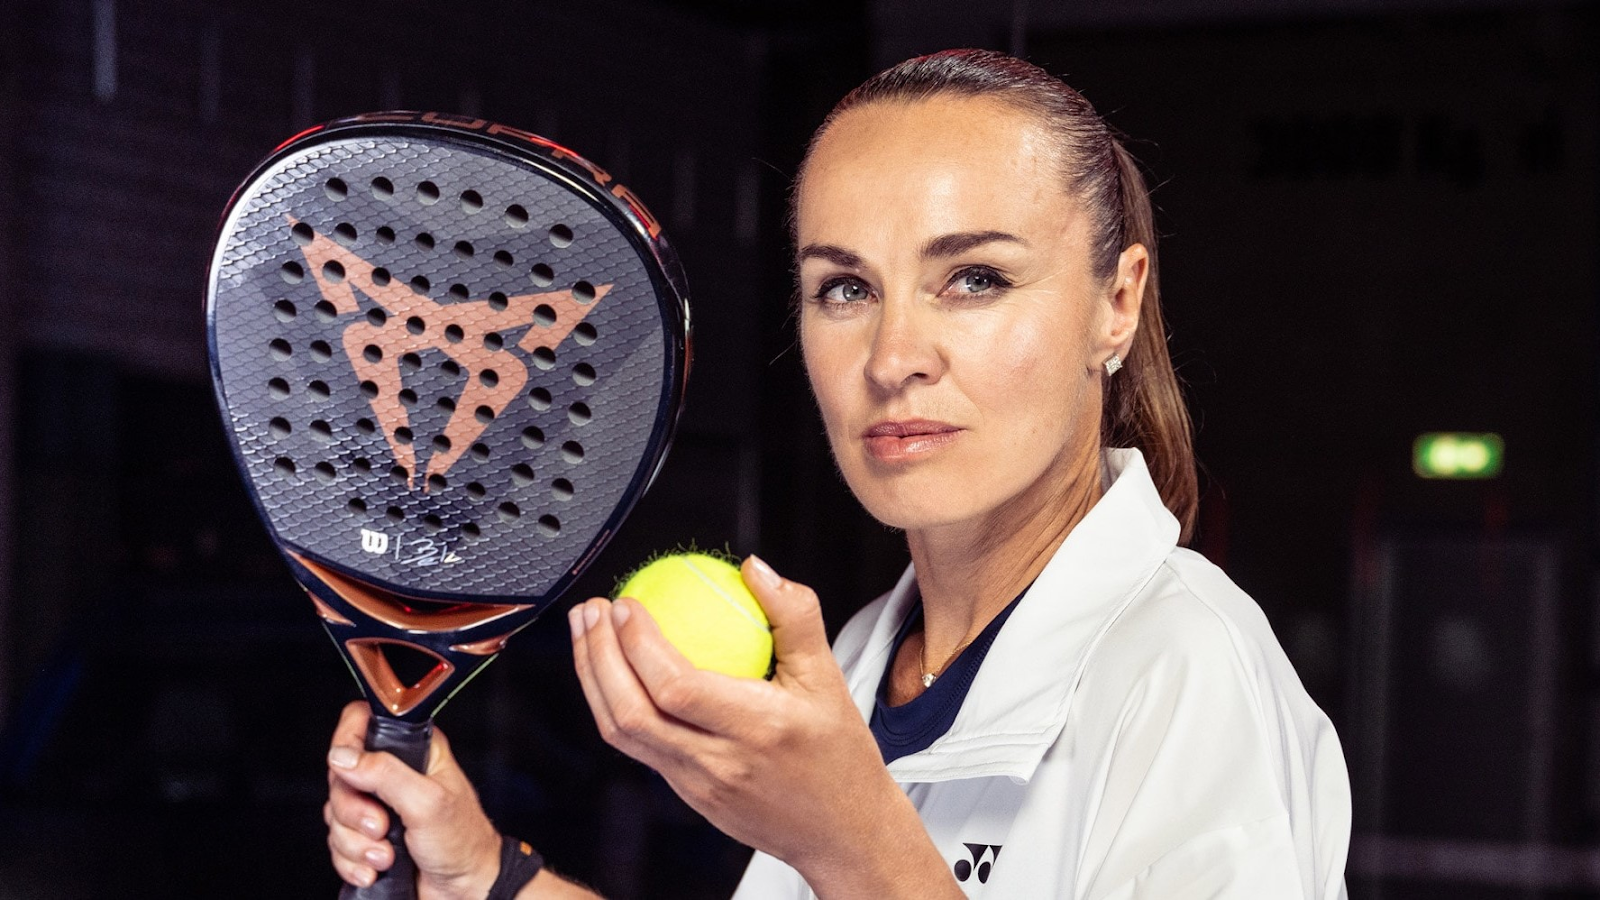 Martina Hingis - Second Greatest Swiss Tennis Players Of All Time